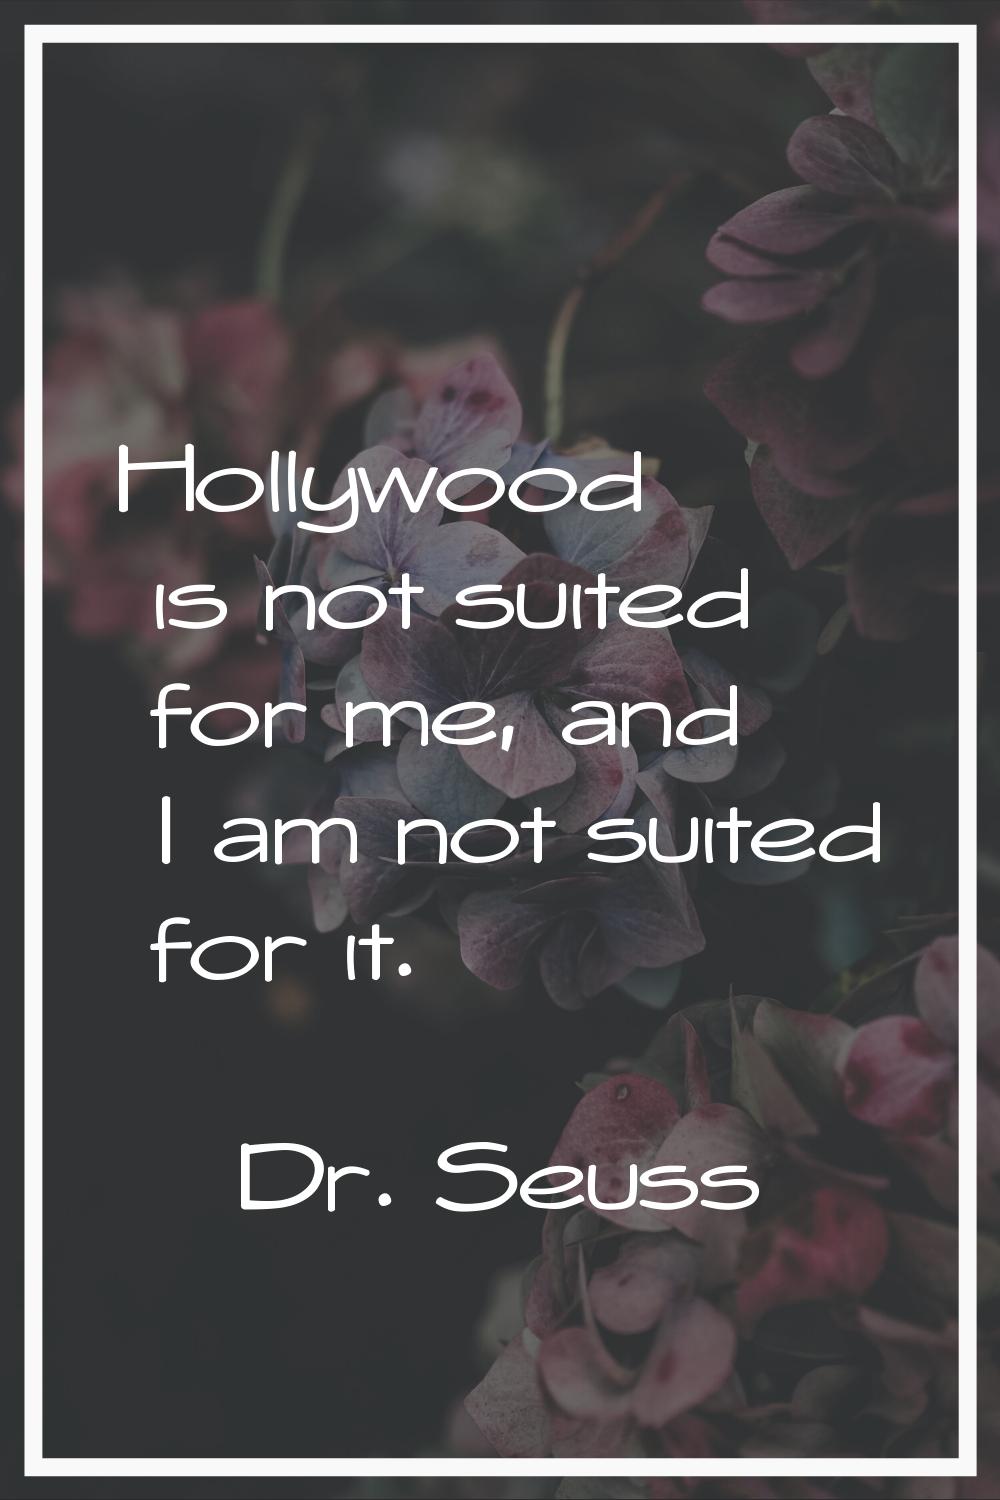 Hollywood is not suited for me, and I am not suited for it.